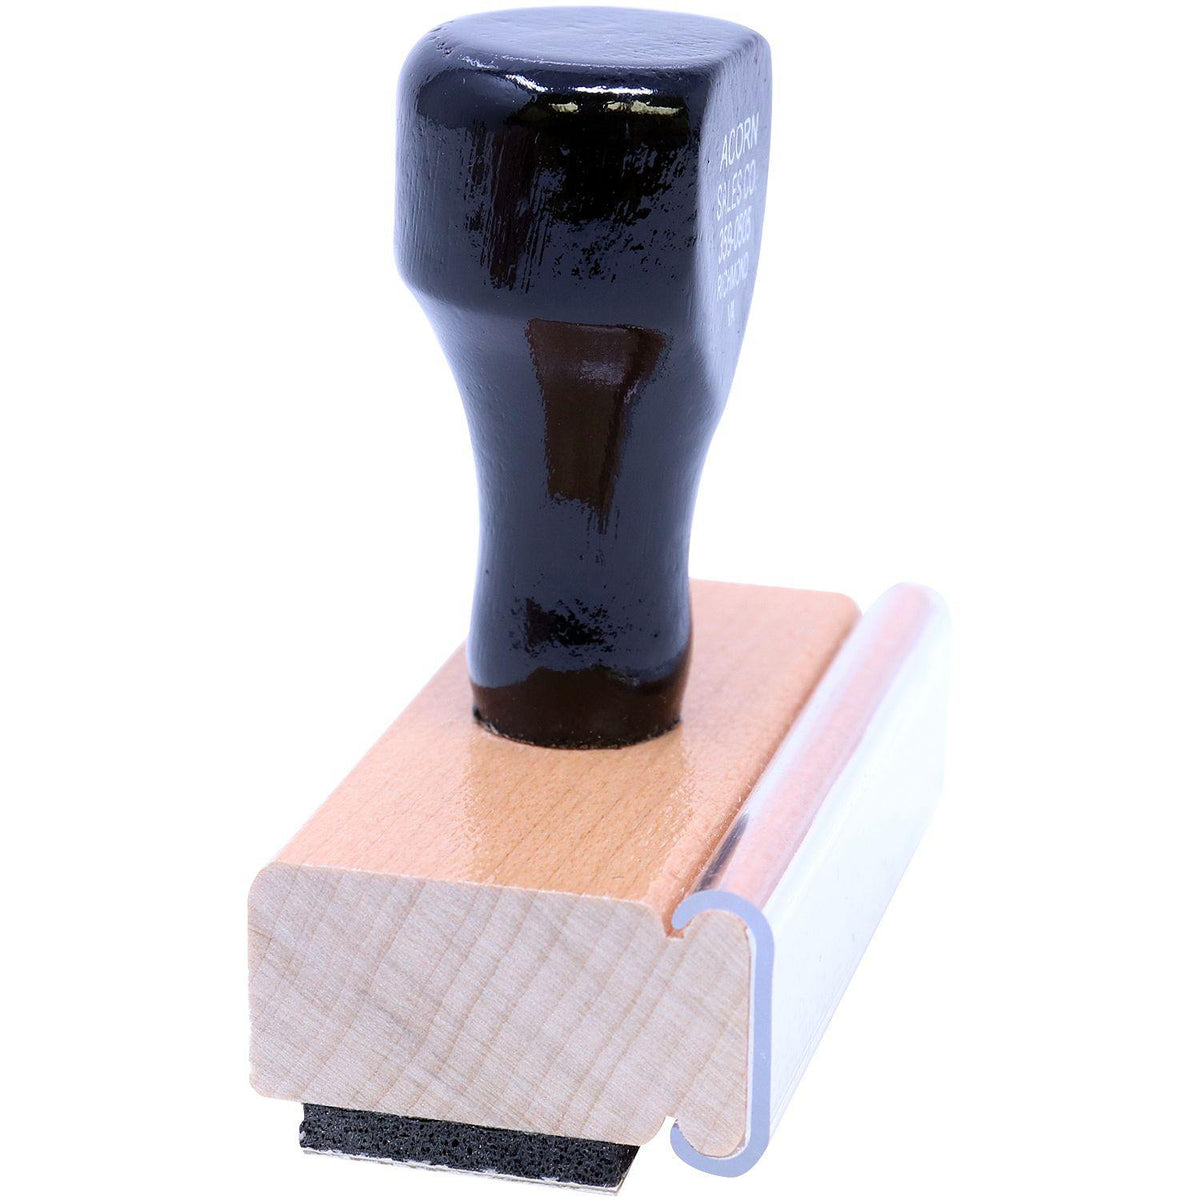 Side View of Large nCov Rubber Stamp at an Angle